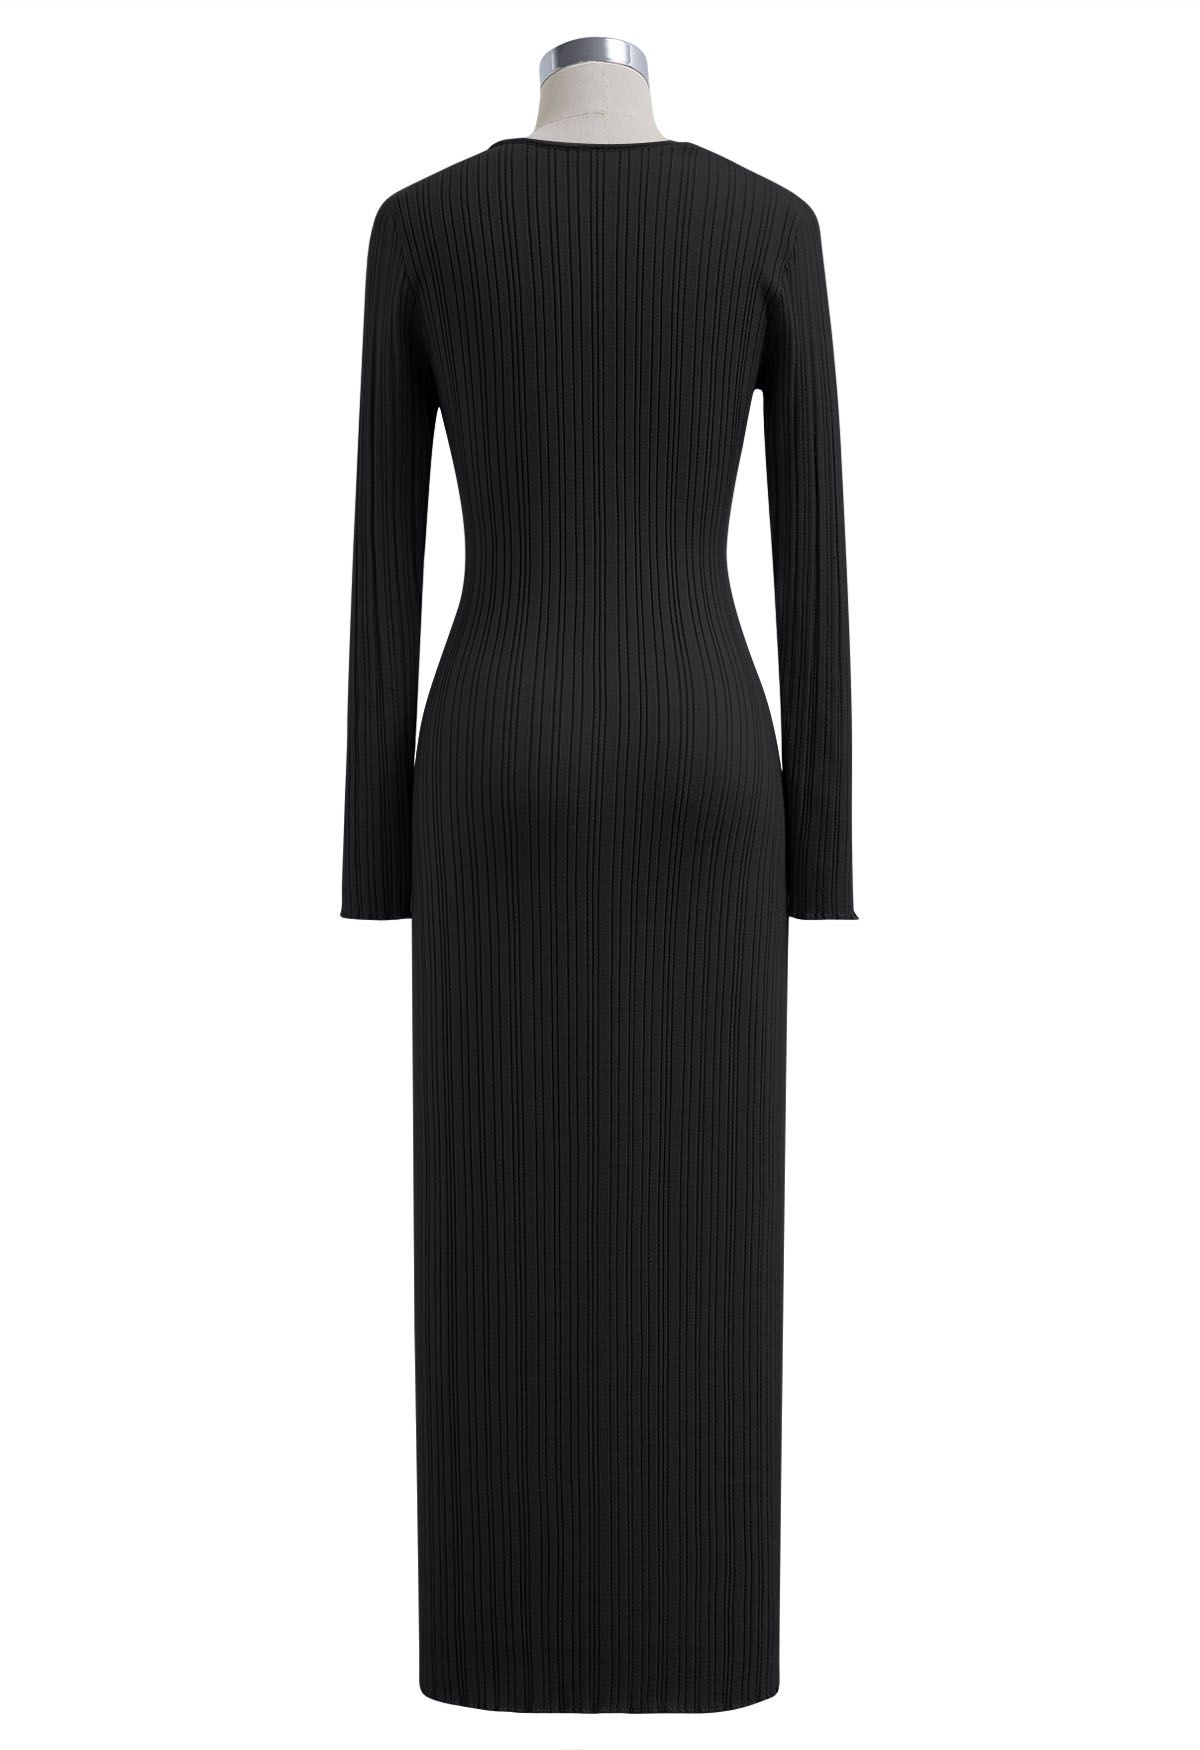 Stripe Texture Fitted Knit Maxi Dress in Black